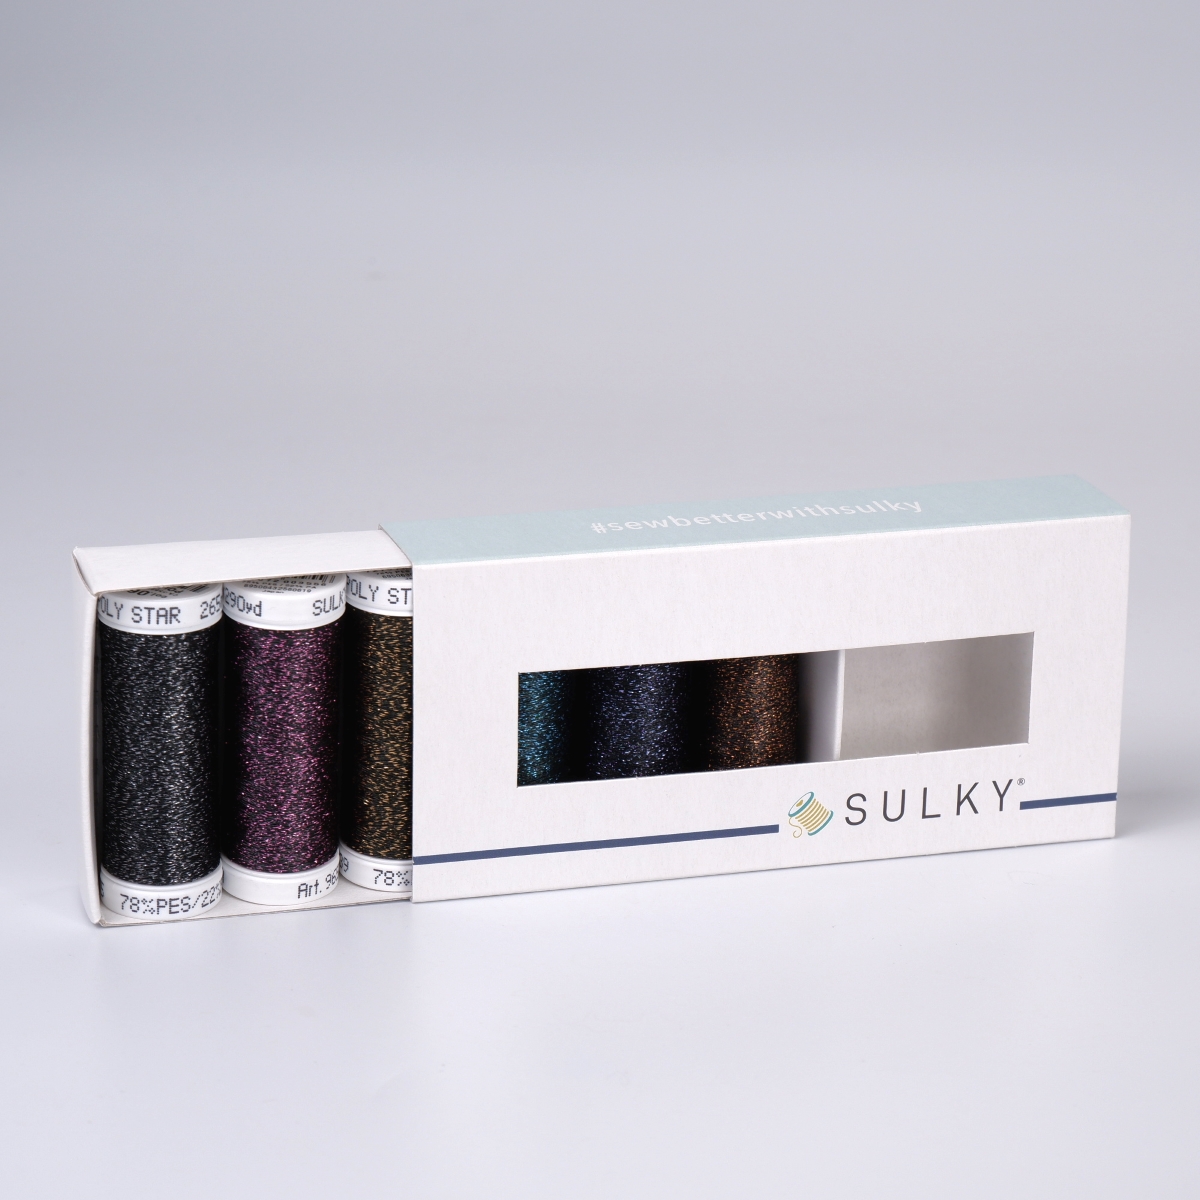 SULKY POLY SPARKLE 30 - COLOURFUL NIGHT
(6x 265m Snap Spools)